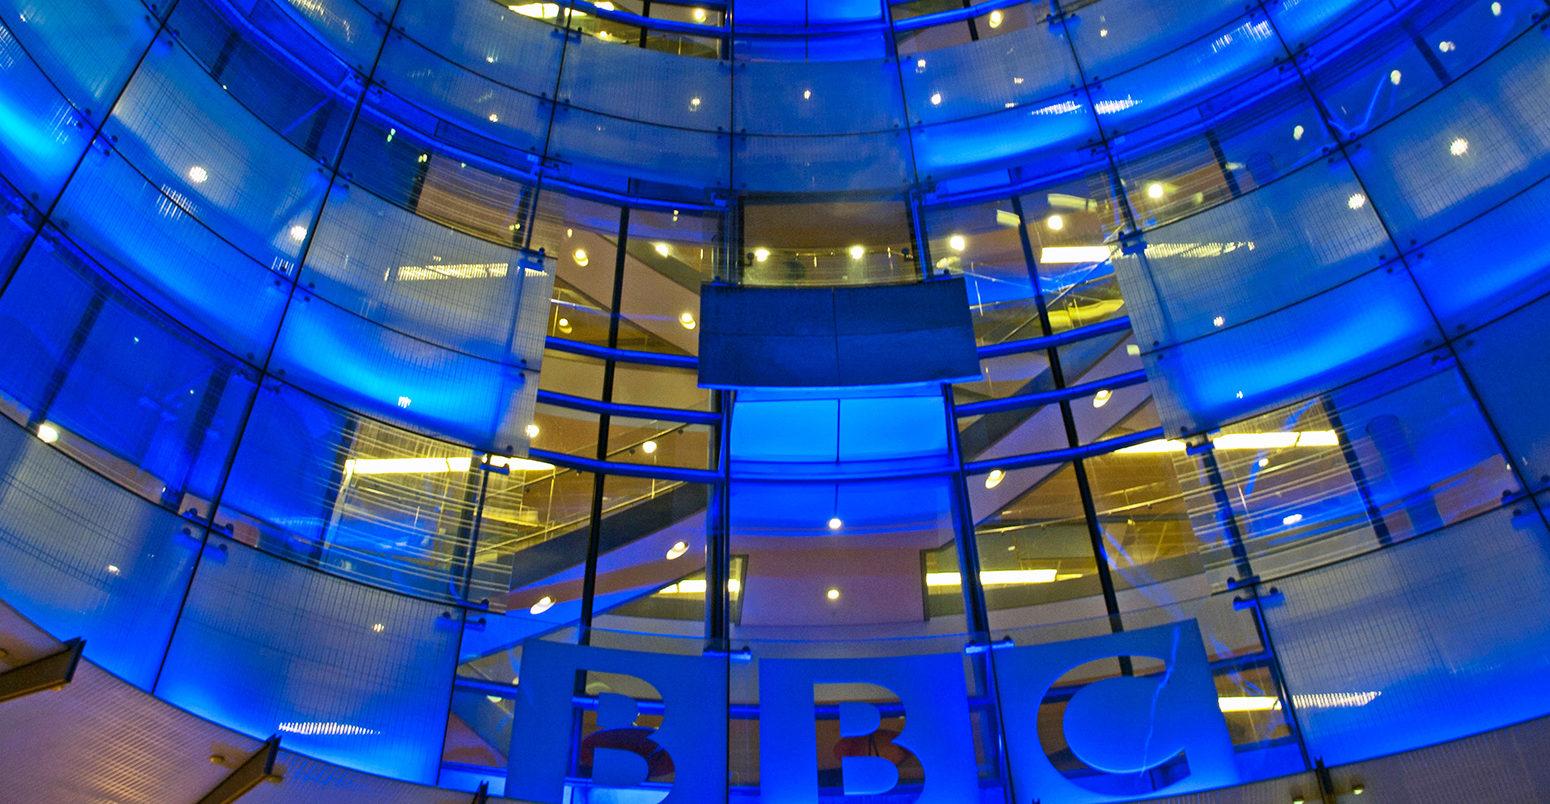 DP4C4Y Facade of the new BBC building at night, London, England, United Kingdom